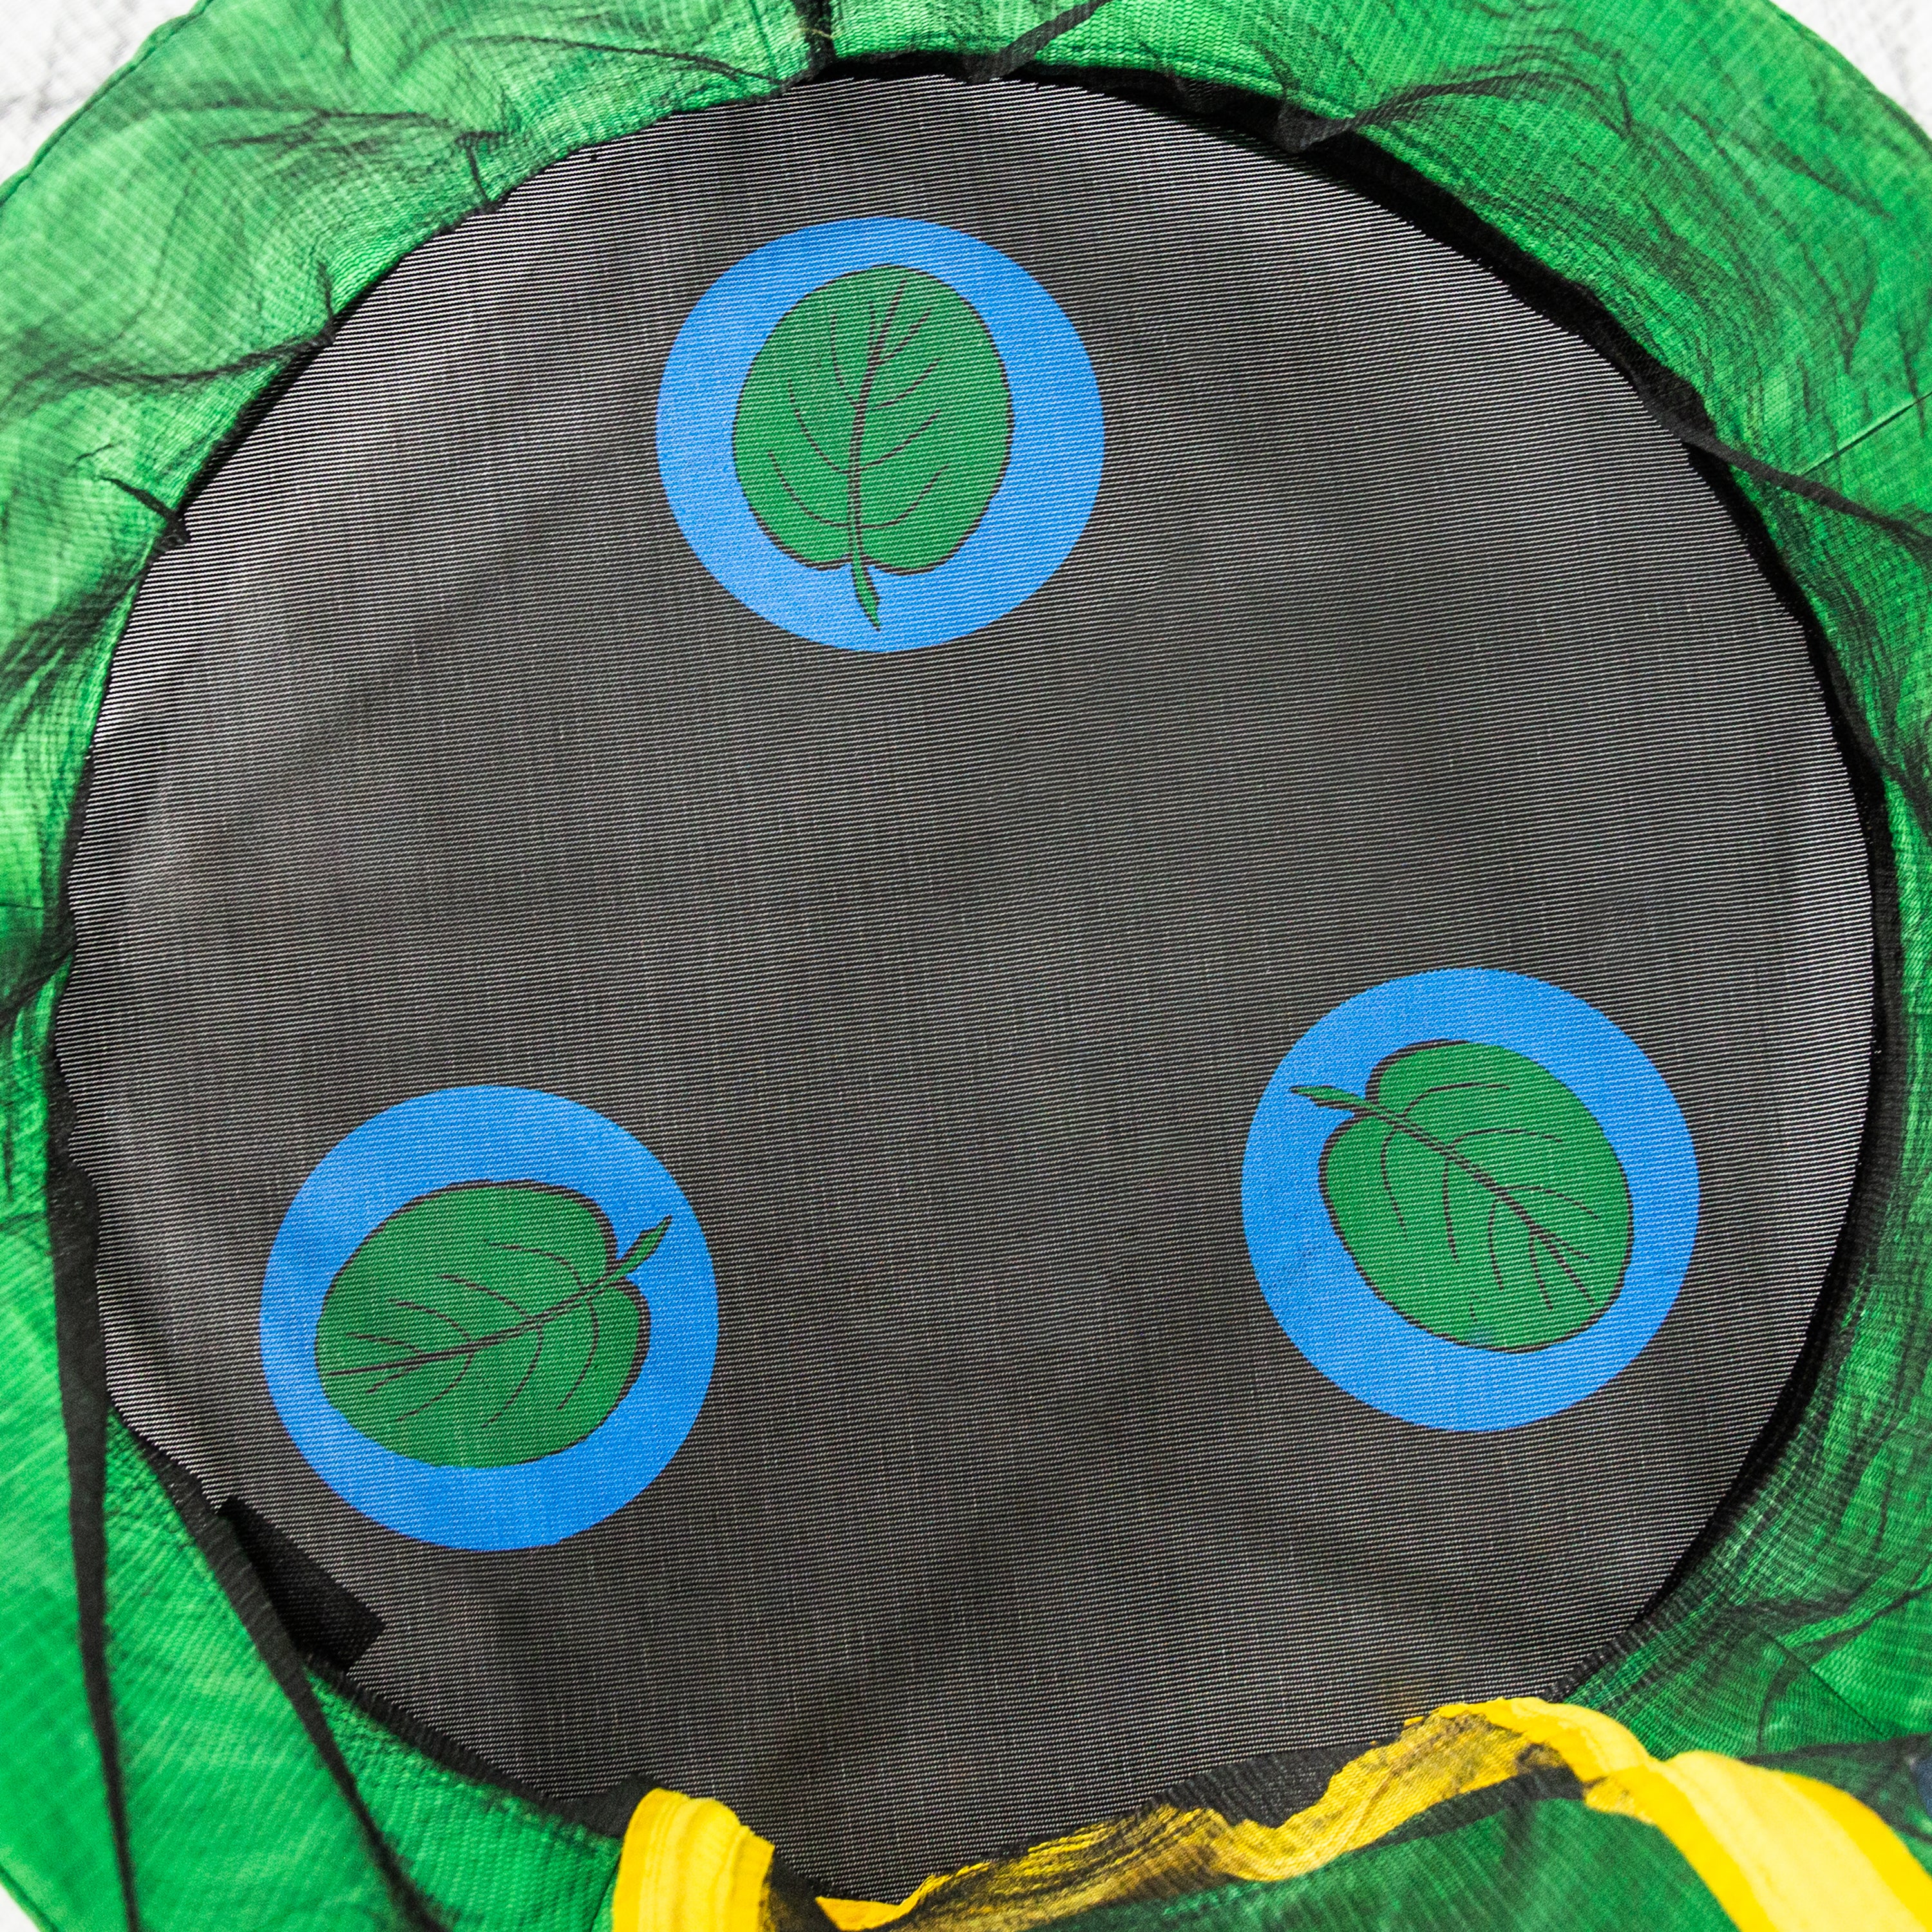 Overhead view of lily-pad design on jump mat. Green lily-pads are surrounded by blue circles. 